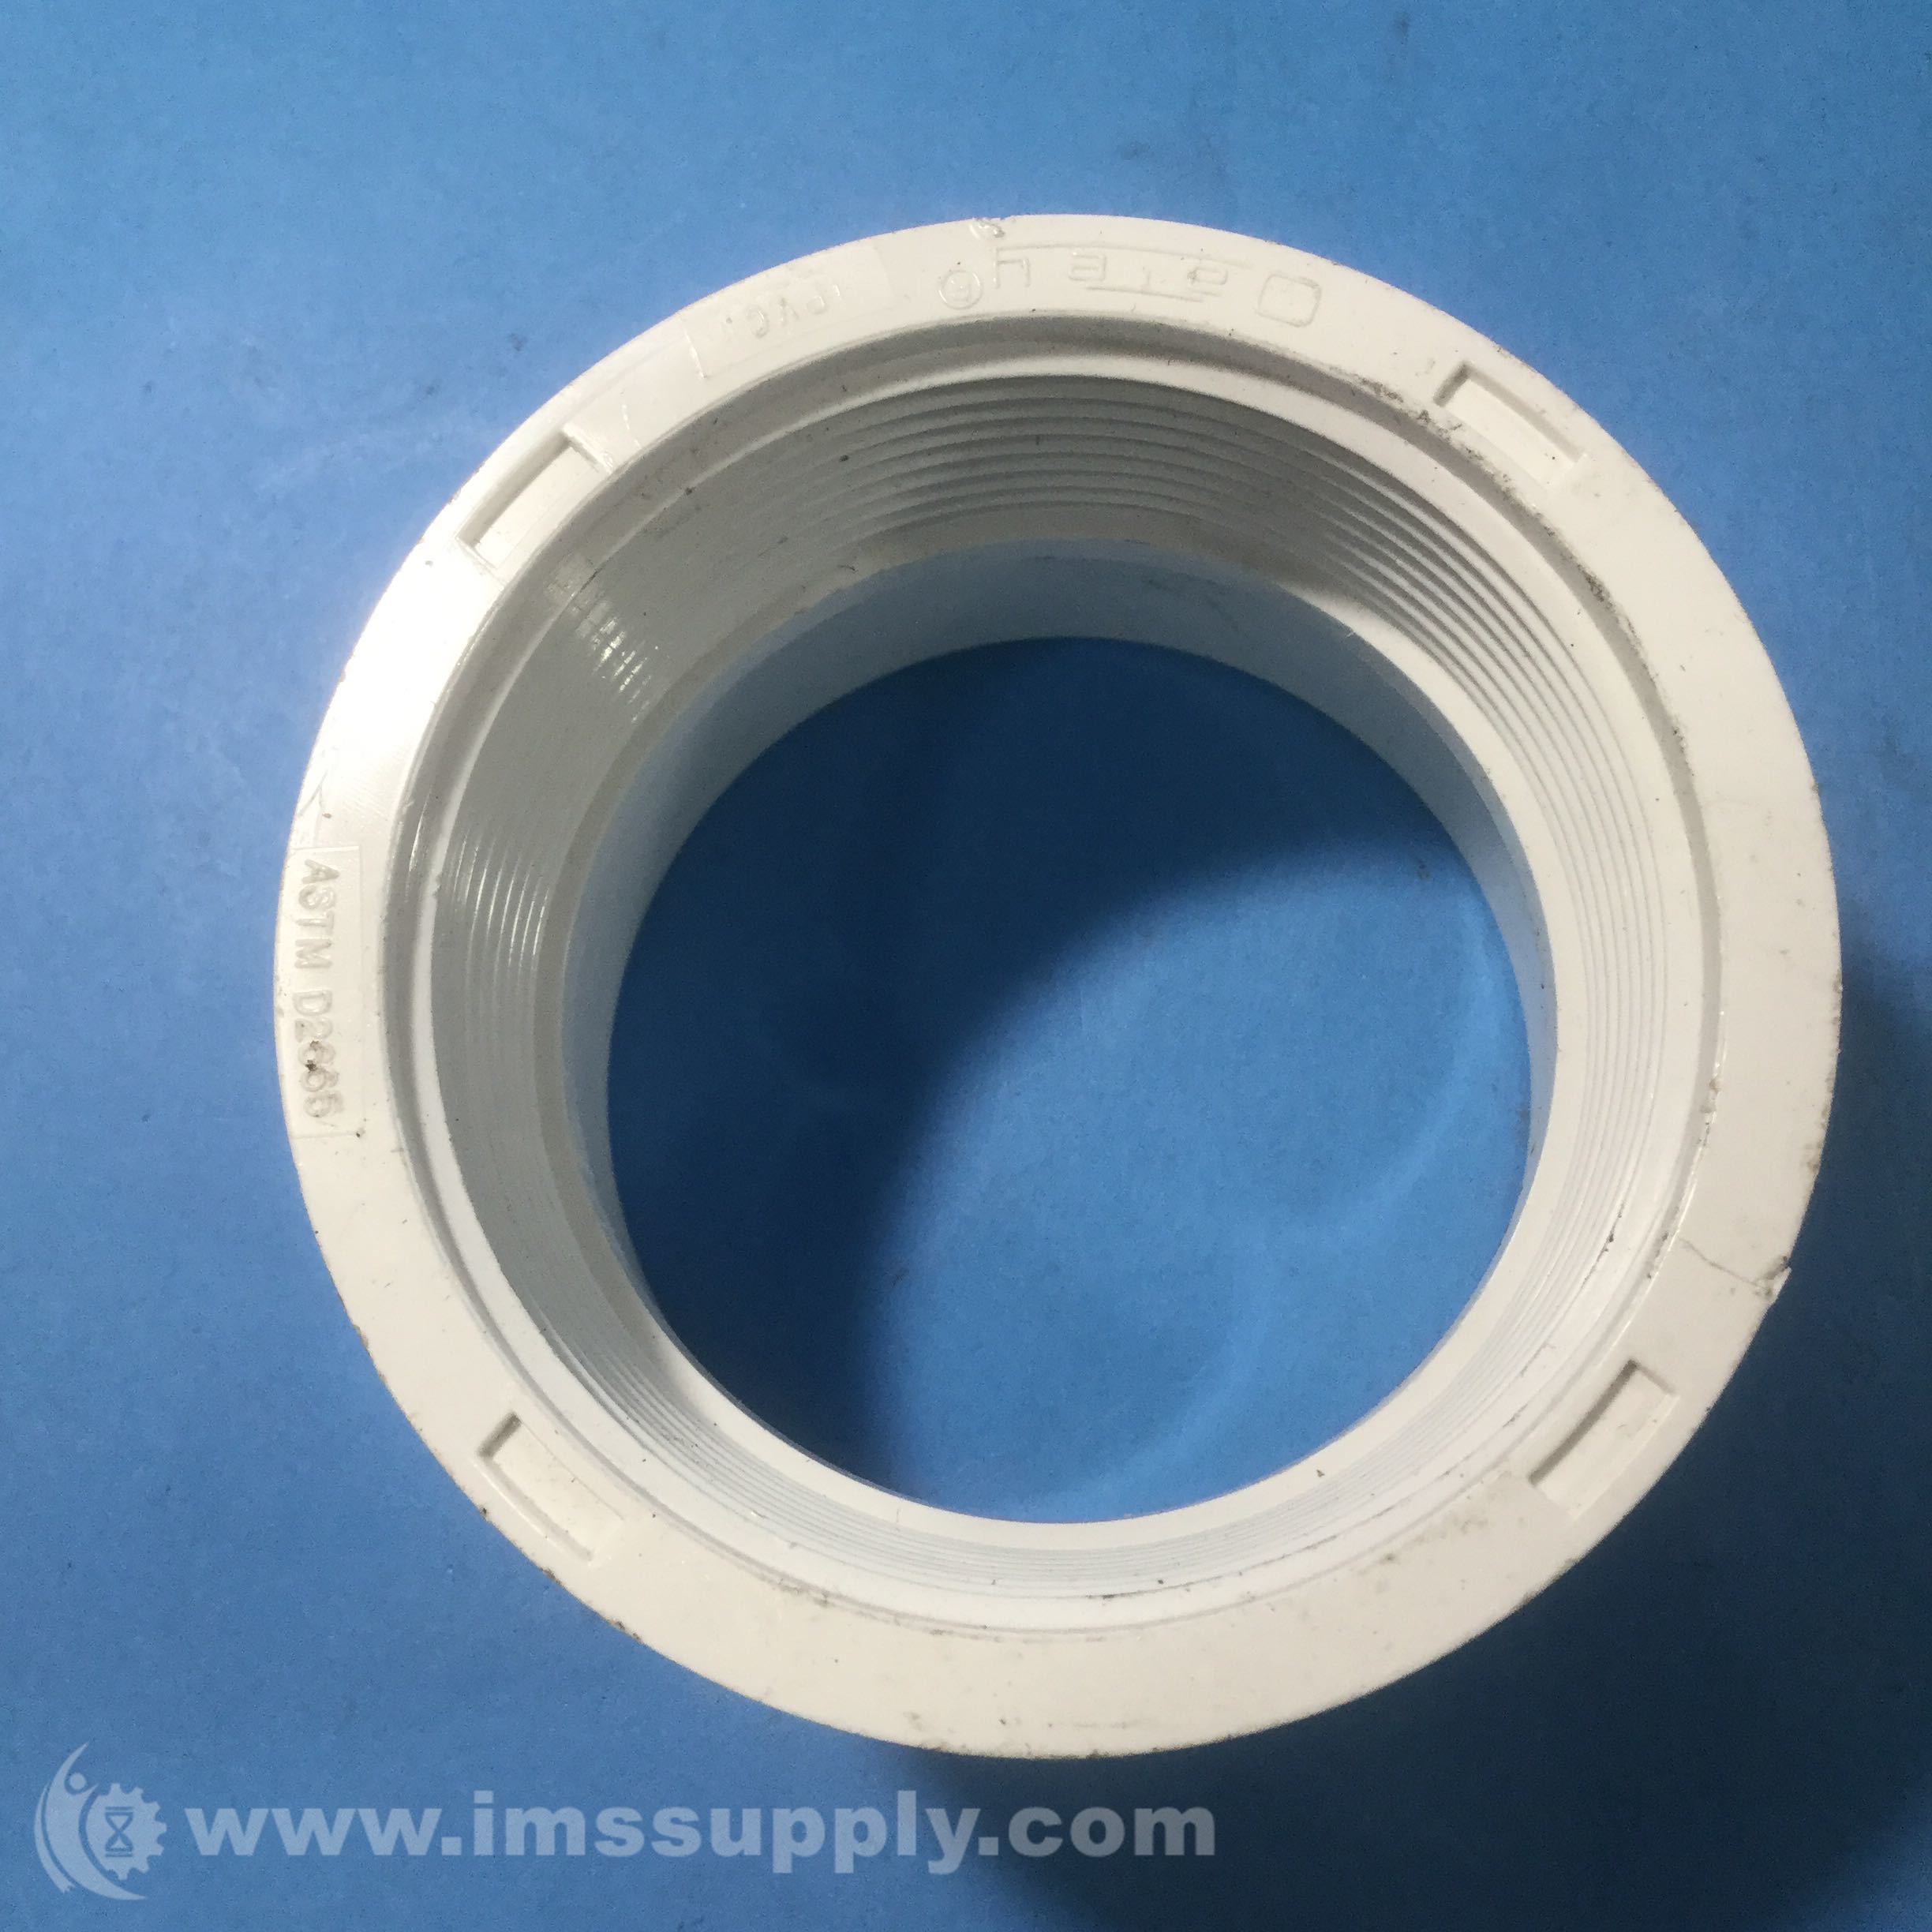 Oatey ASTM D2665 ABS D2661 Waste PVC and Vent Pipe w'Fitting Plastic Drain 